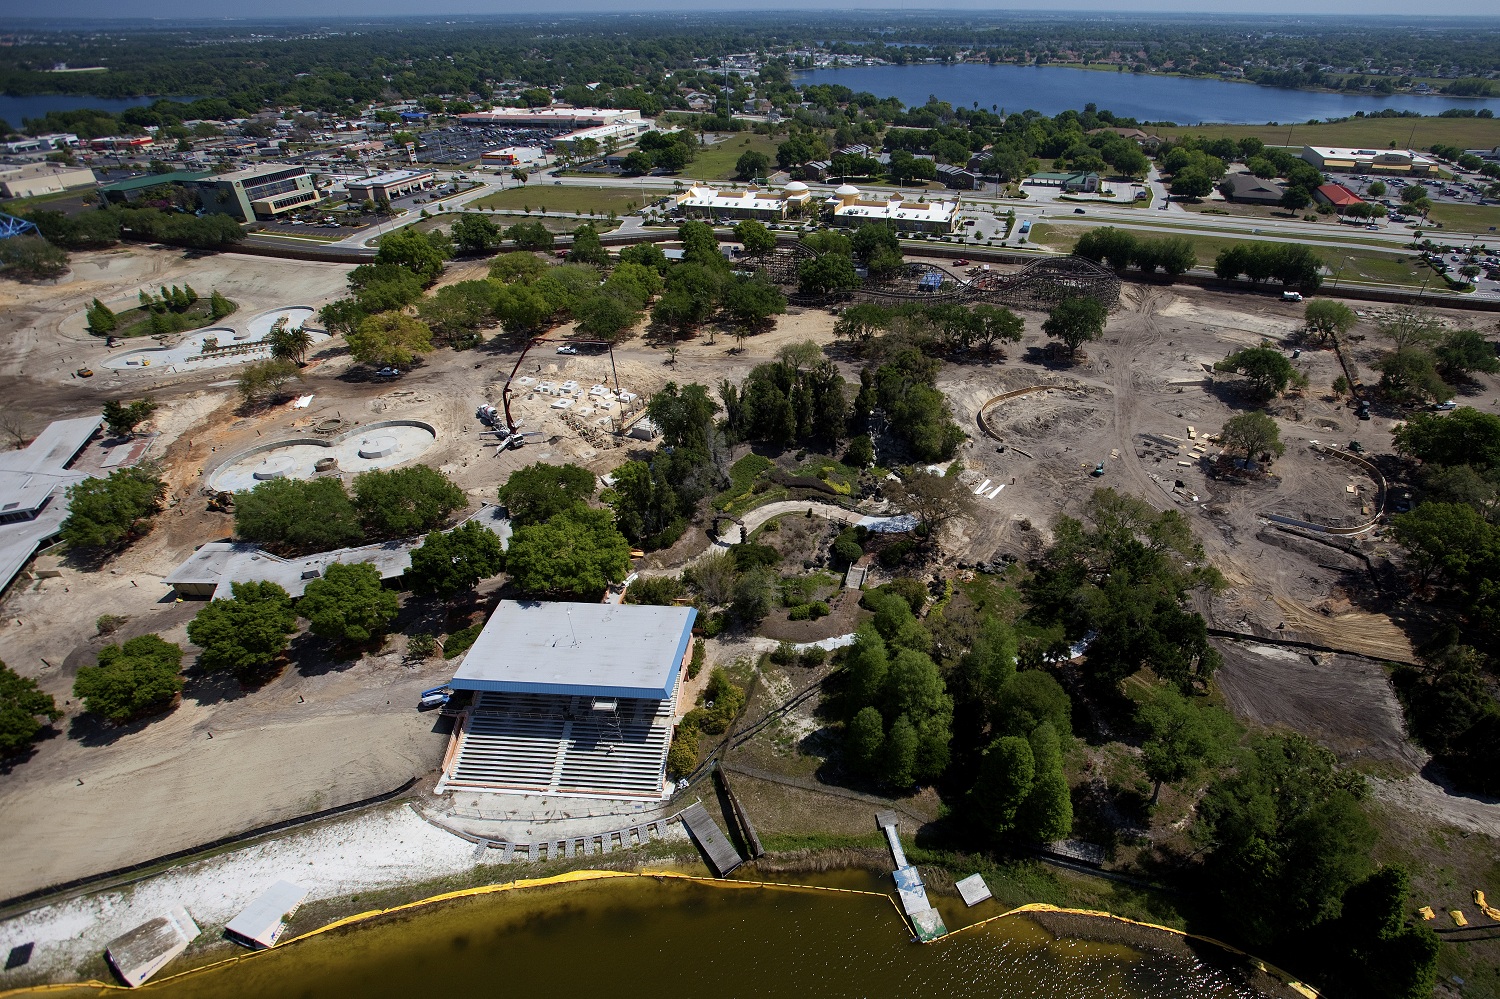 Legoland Florida Aerial Update Snapping The Bricks Together Slowly